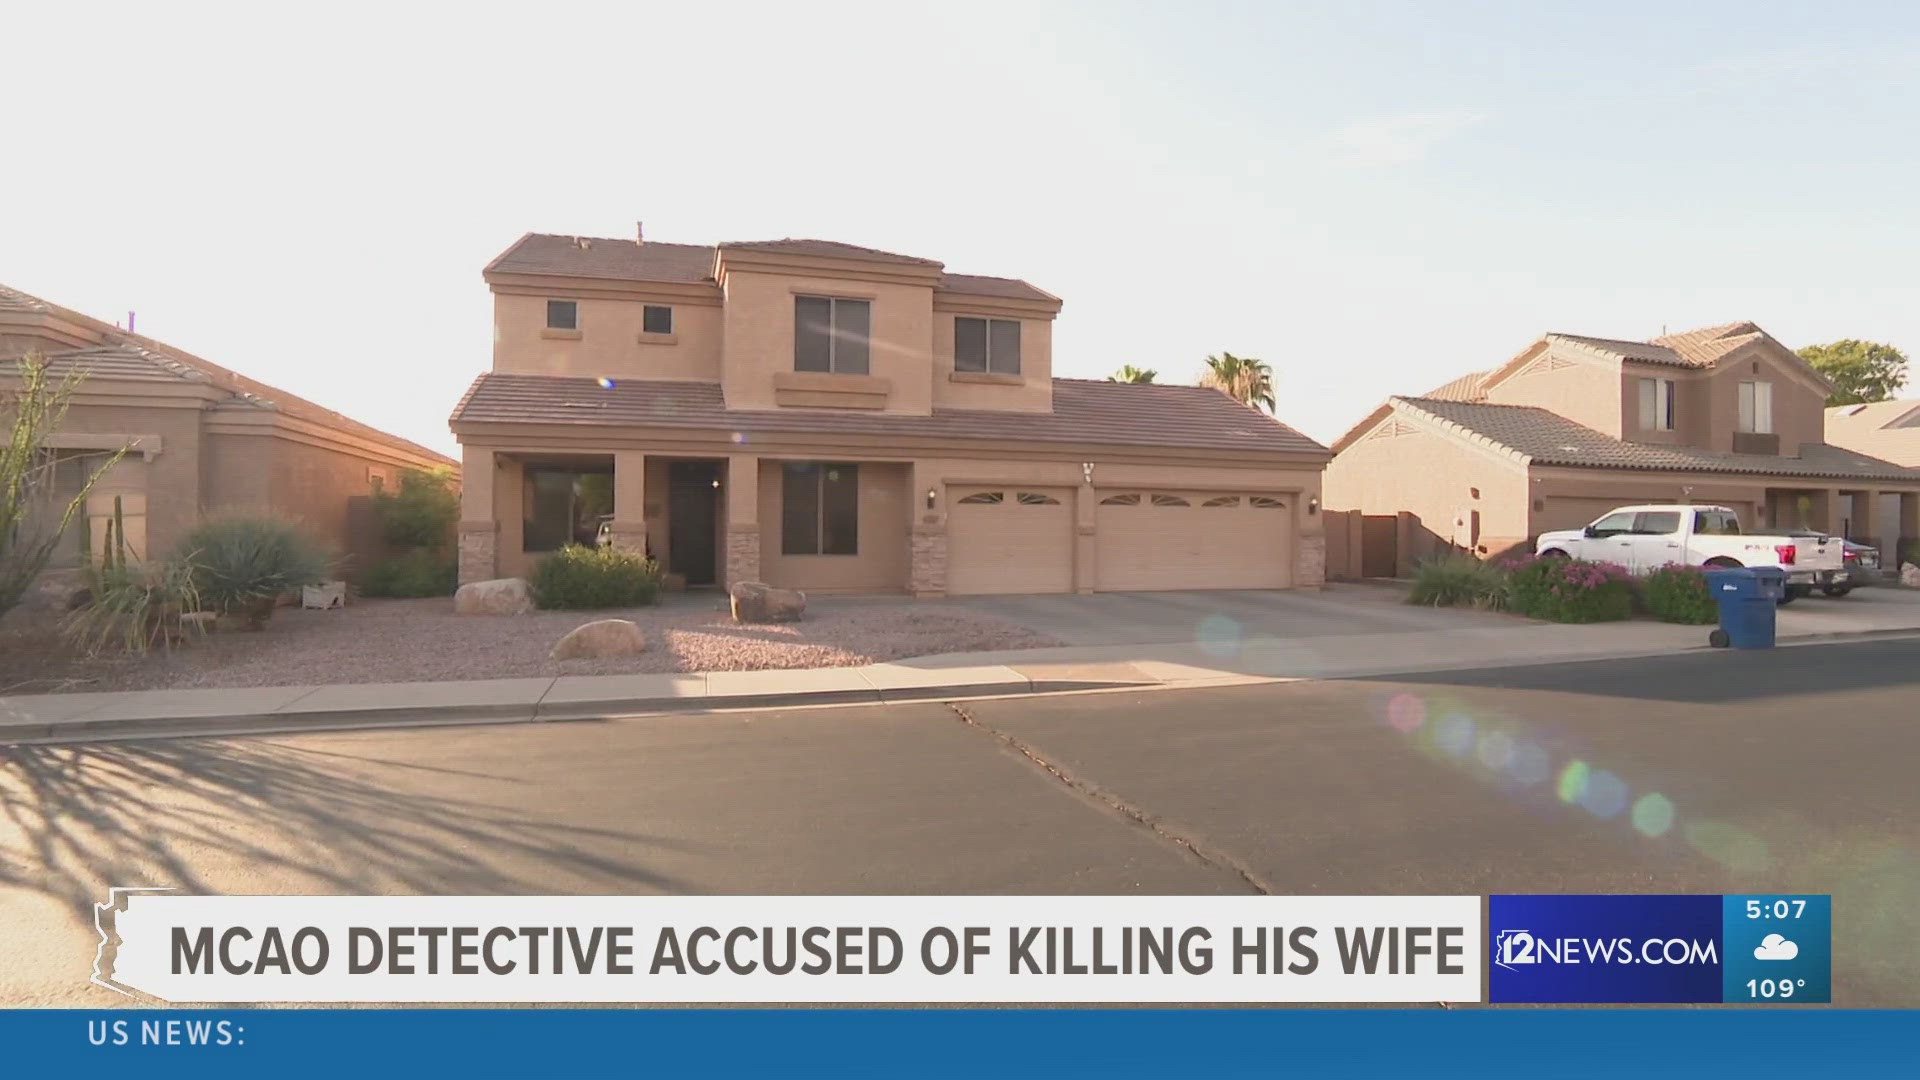 The detective allegedly admitted to strangling his wife to death on July 31 in Mesa.